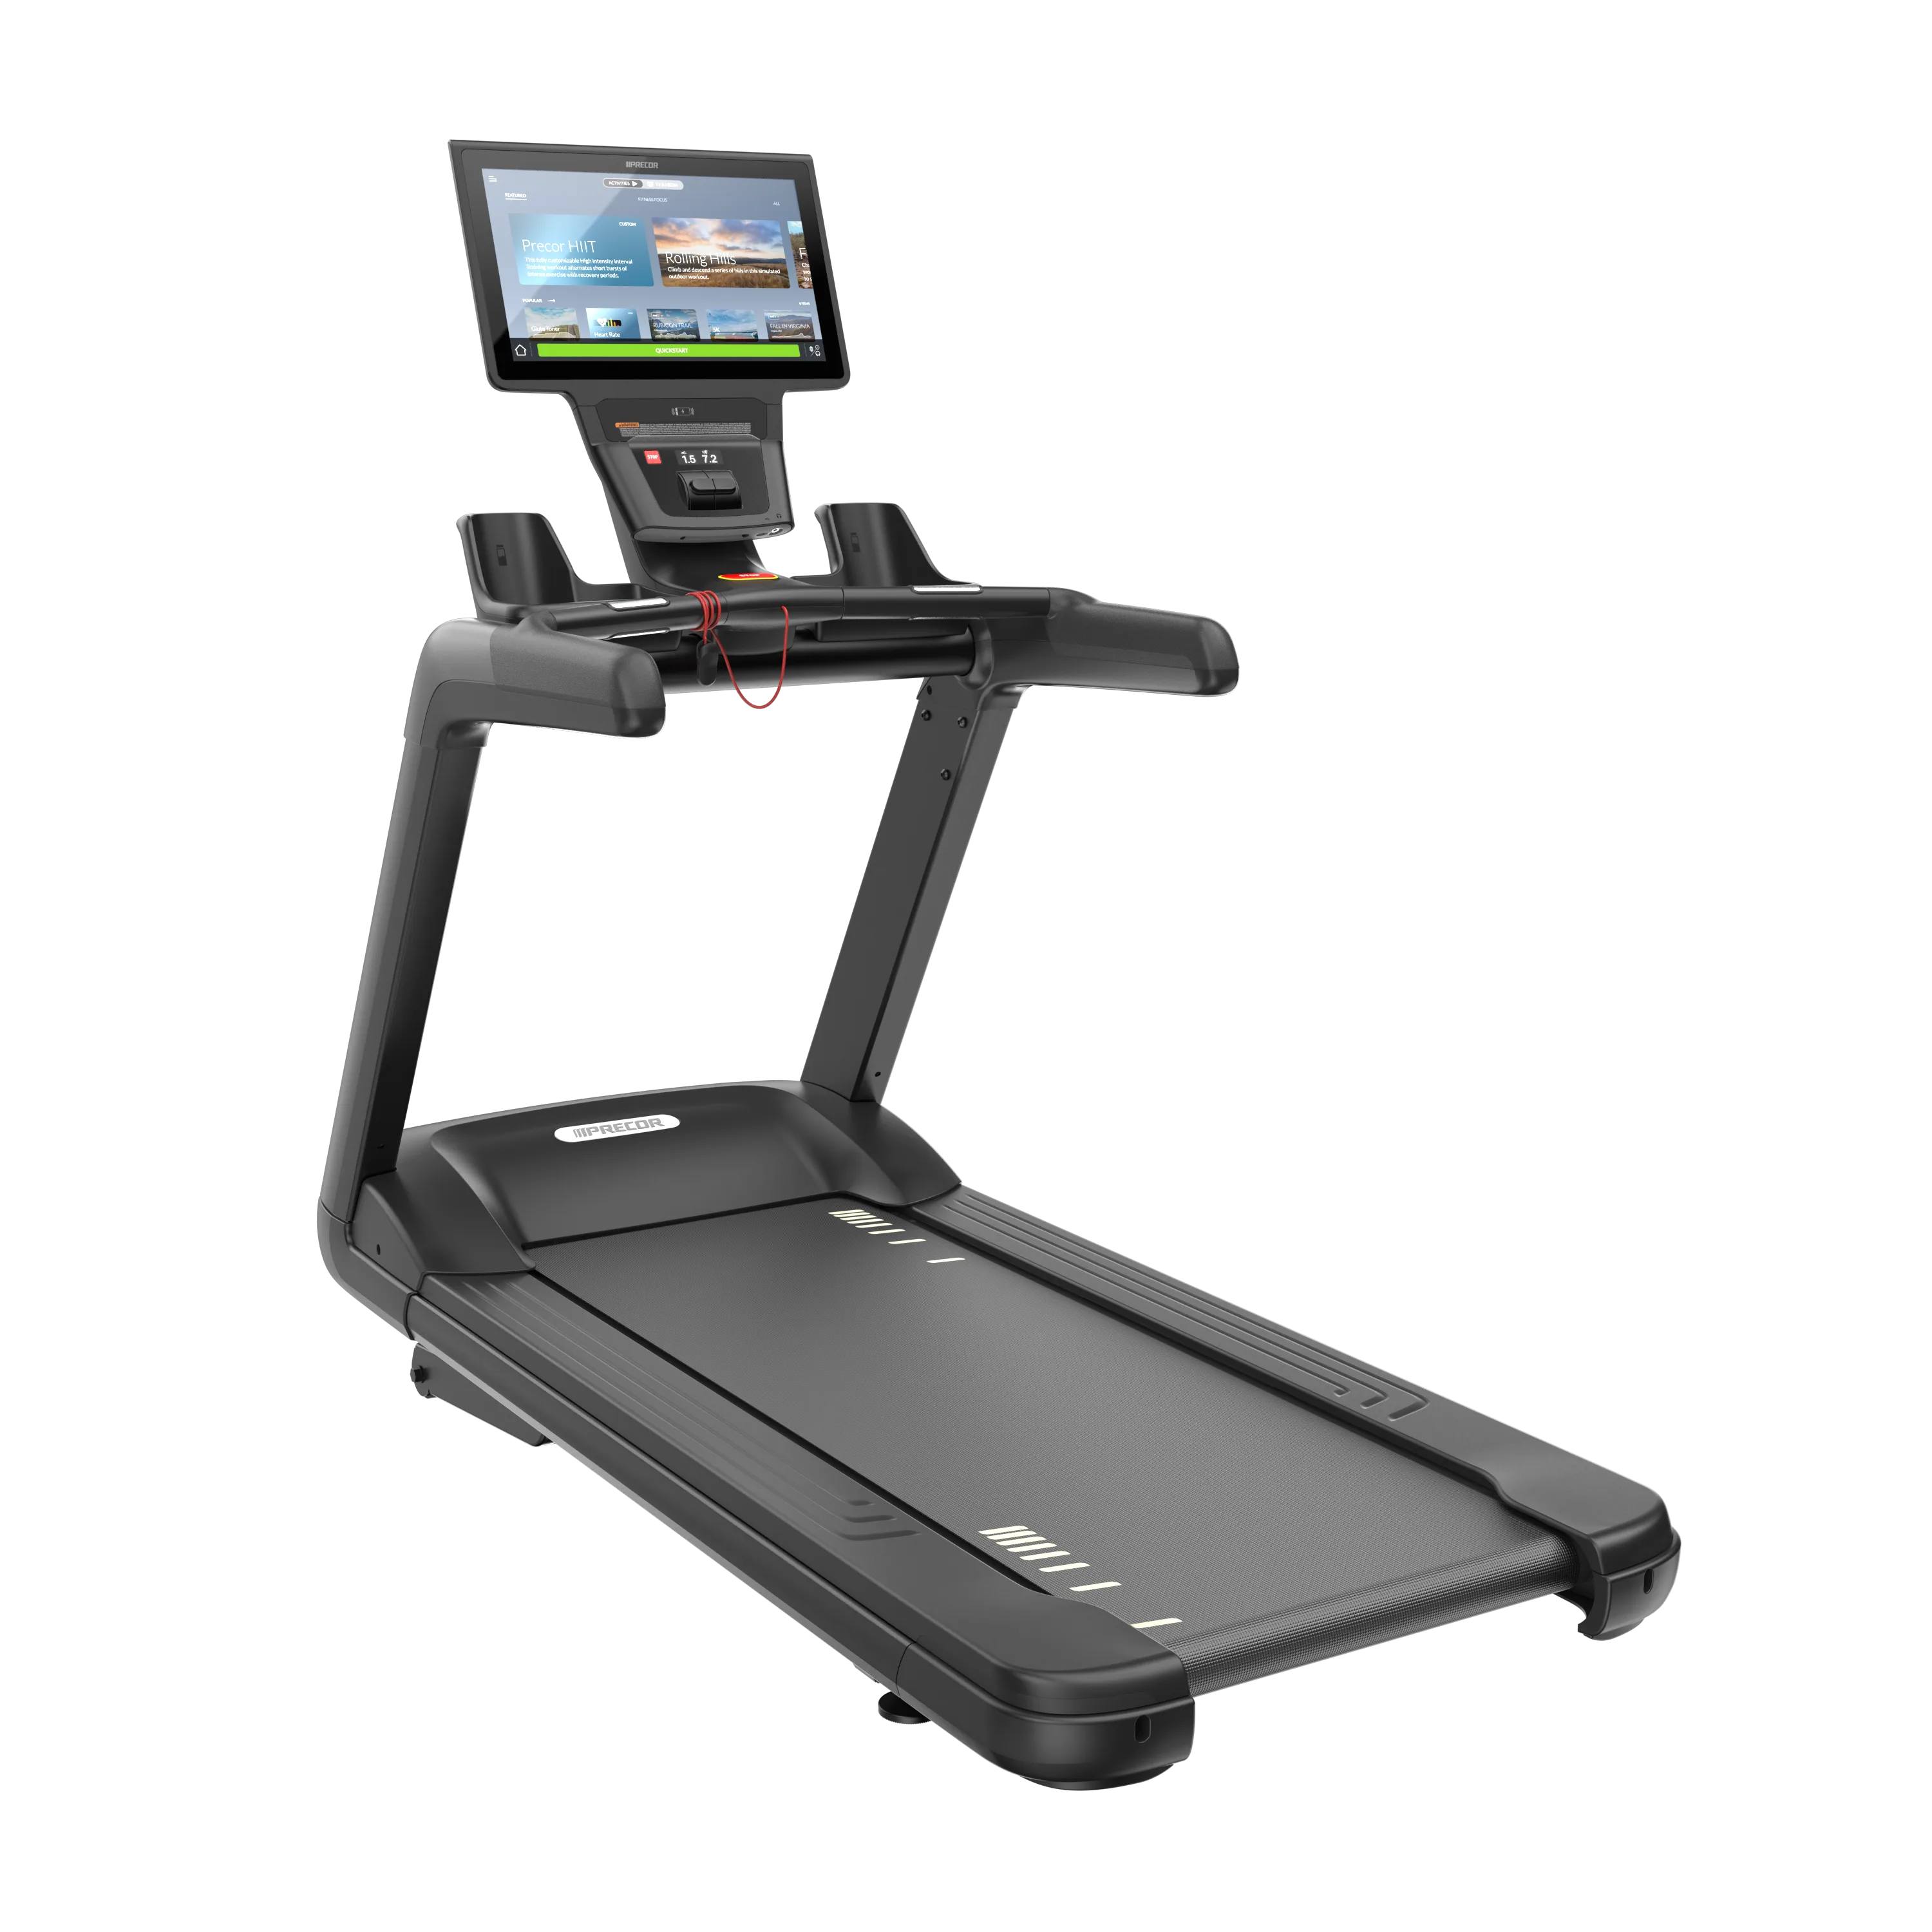 Treadmill 600 line, with P94 touchscreen console